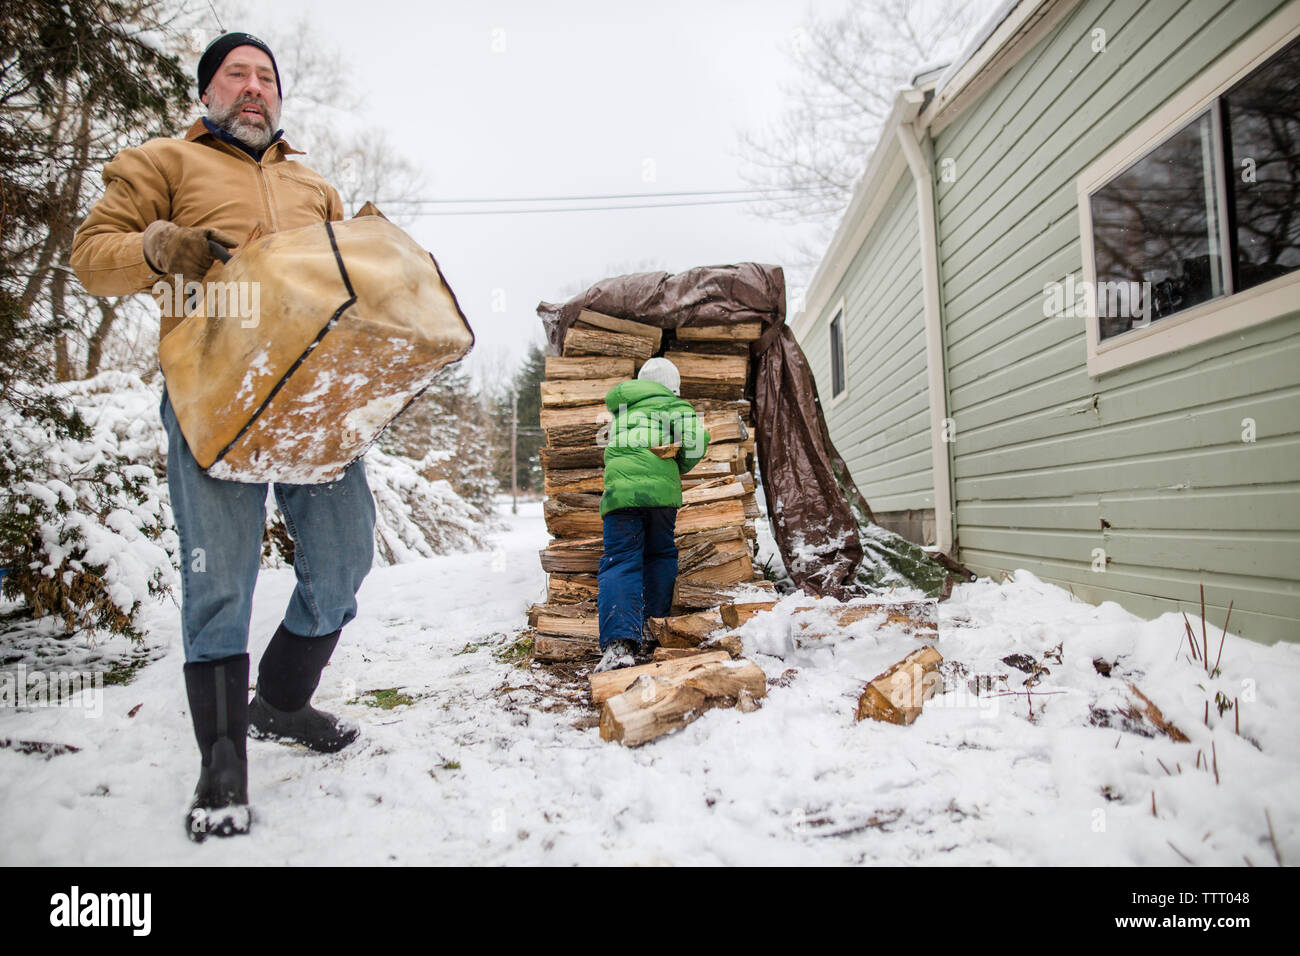 A young child helps his father collect wood from large stack in snow Stock Photo